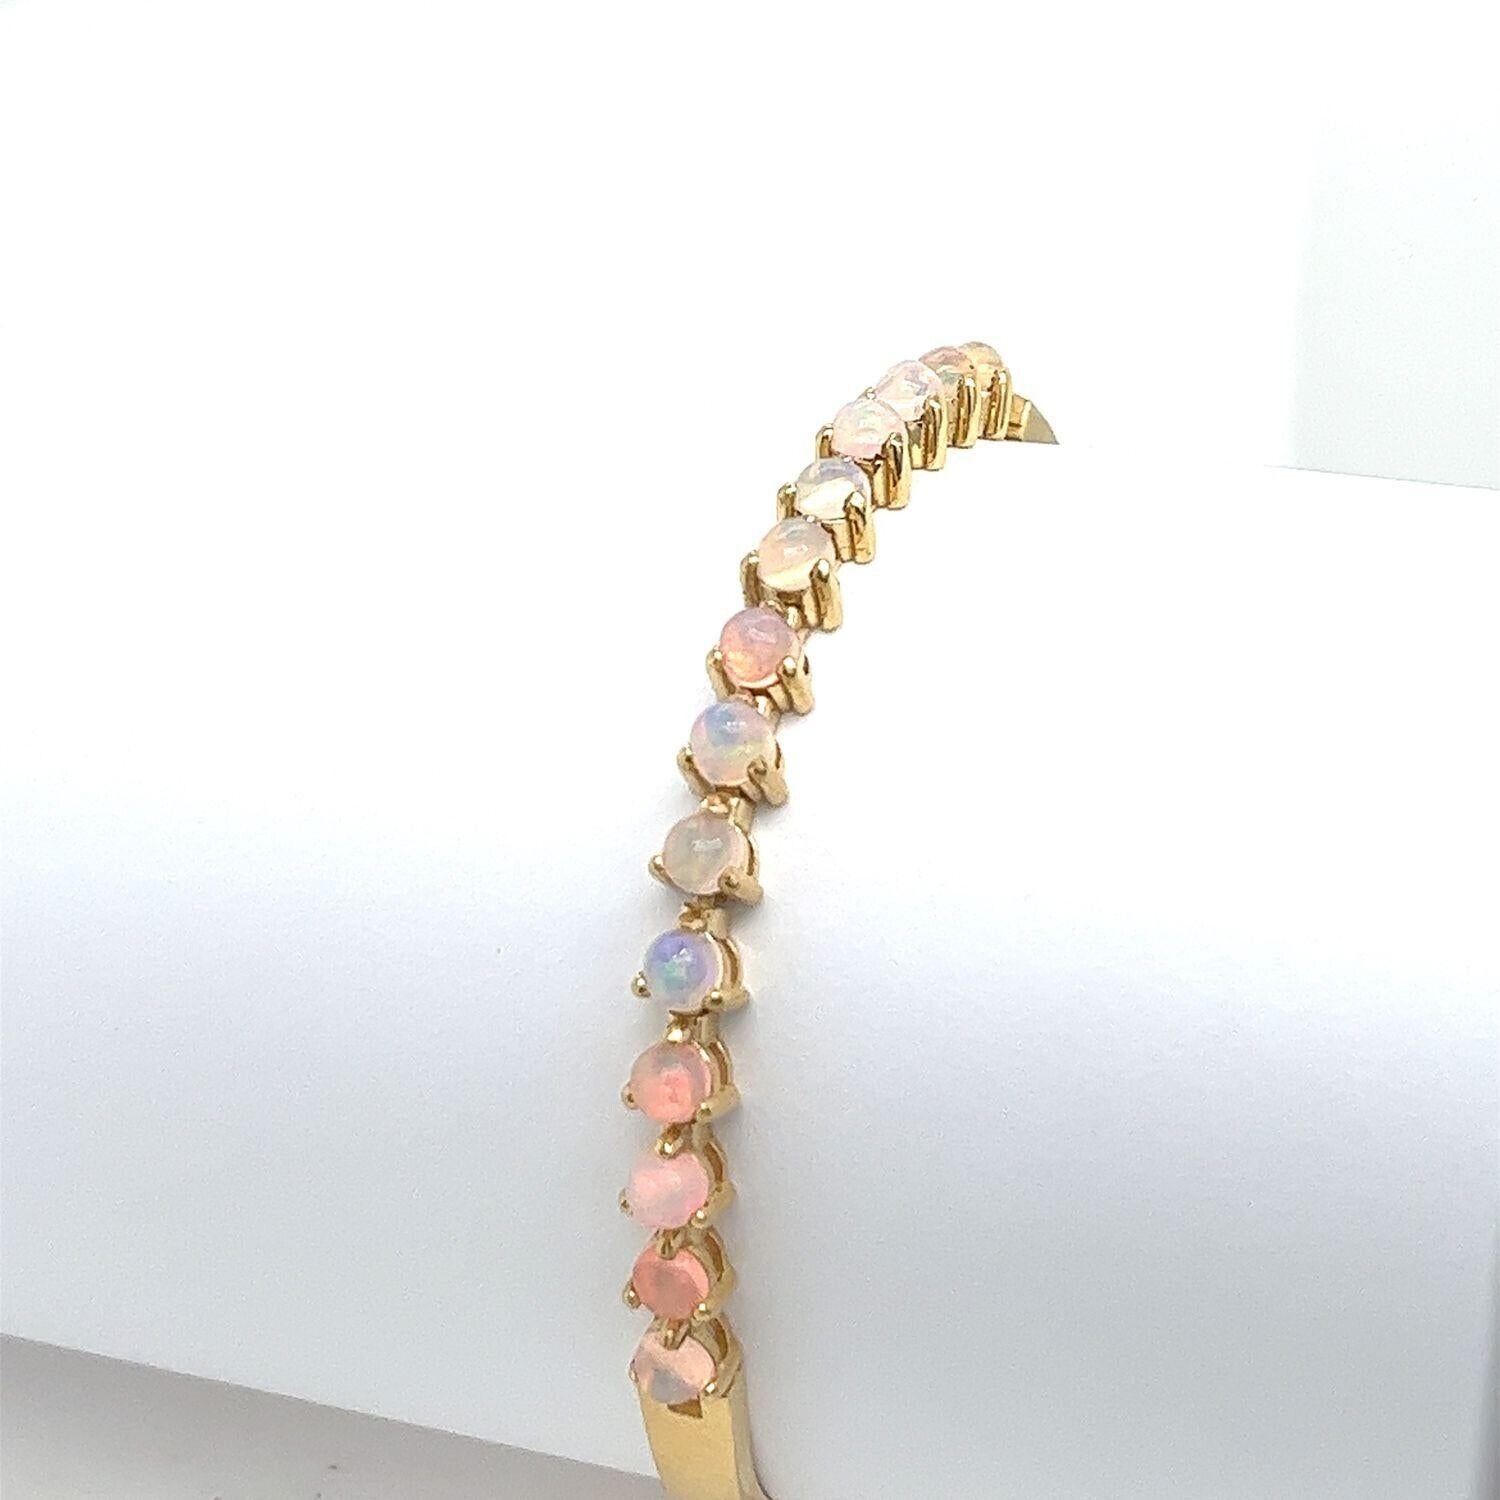 This bracelet is made of 18ct Yellow Gold and set with 14 round natural Opals, and has a beautiful finish. This design is ideal for everyday wear.

Additional Information:
This bracelet is made of 18ct Yellow Gold and set with 14 round natural